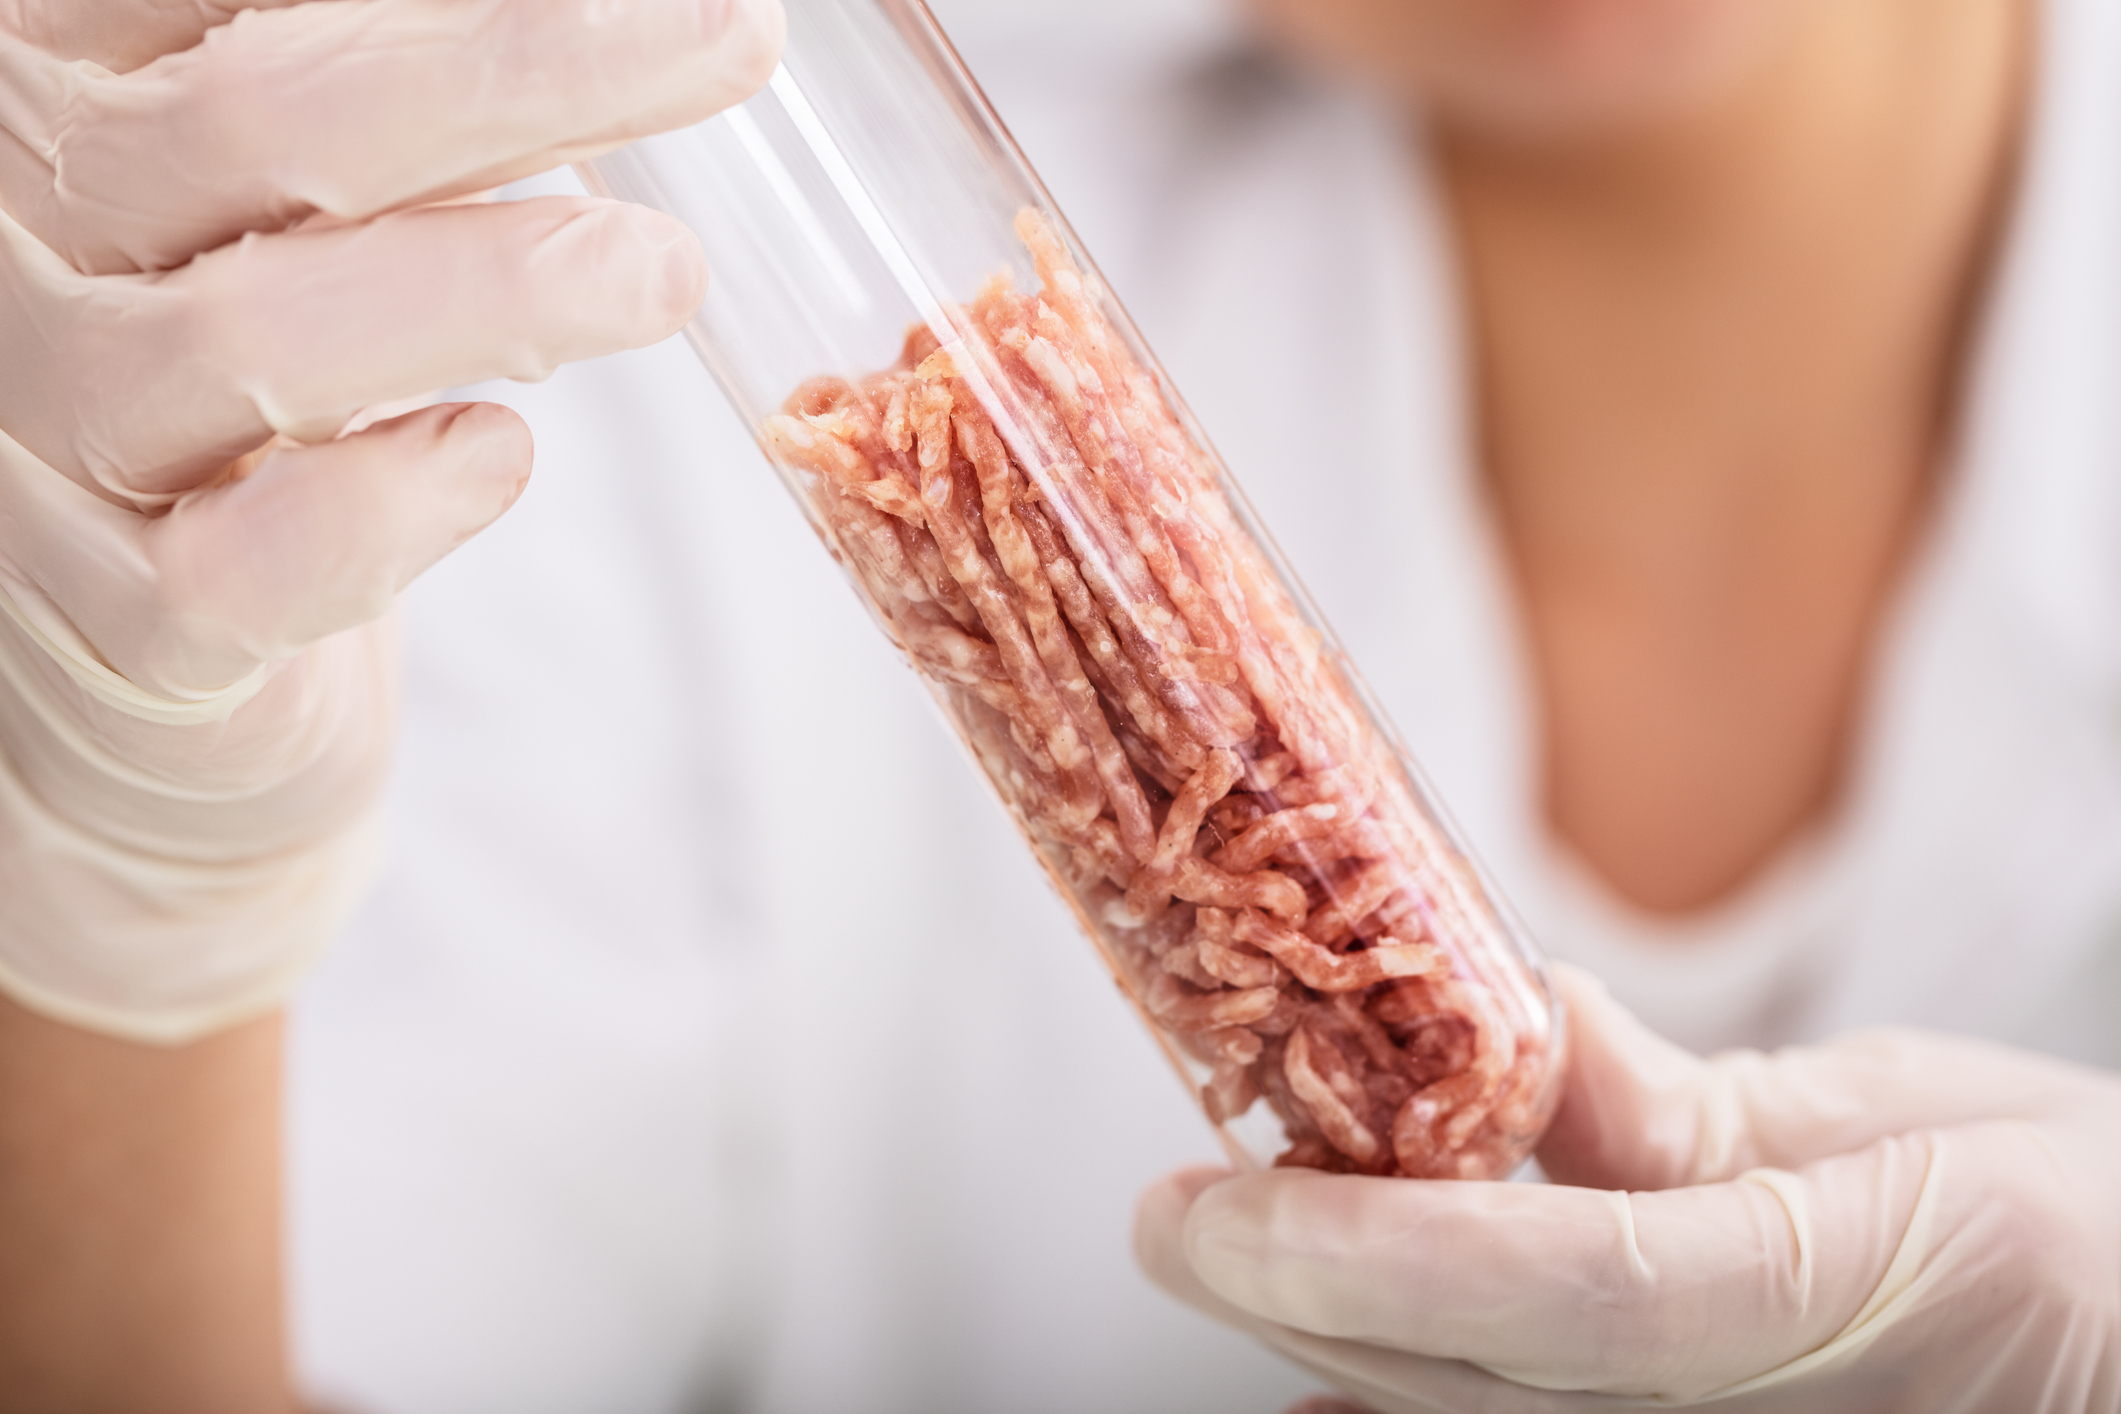 Lab-grown meat is advancing; are you ready?